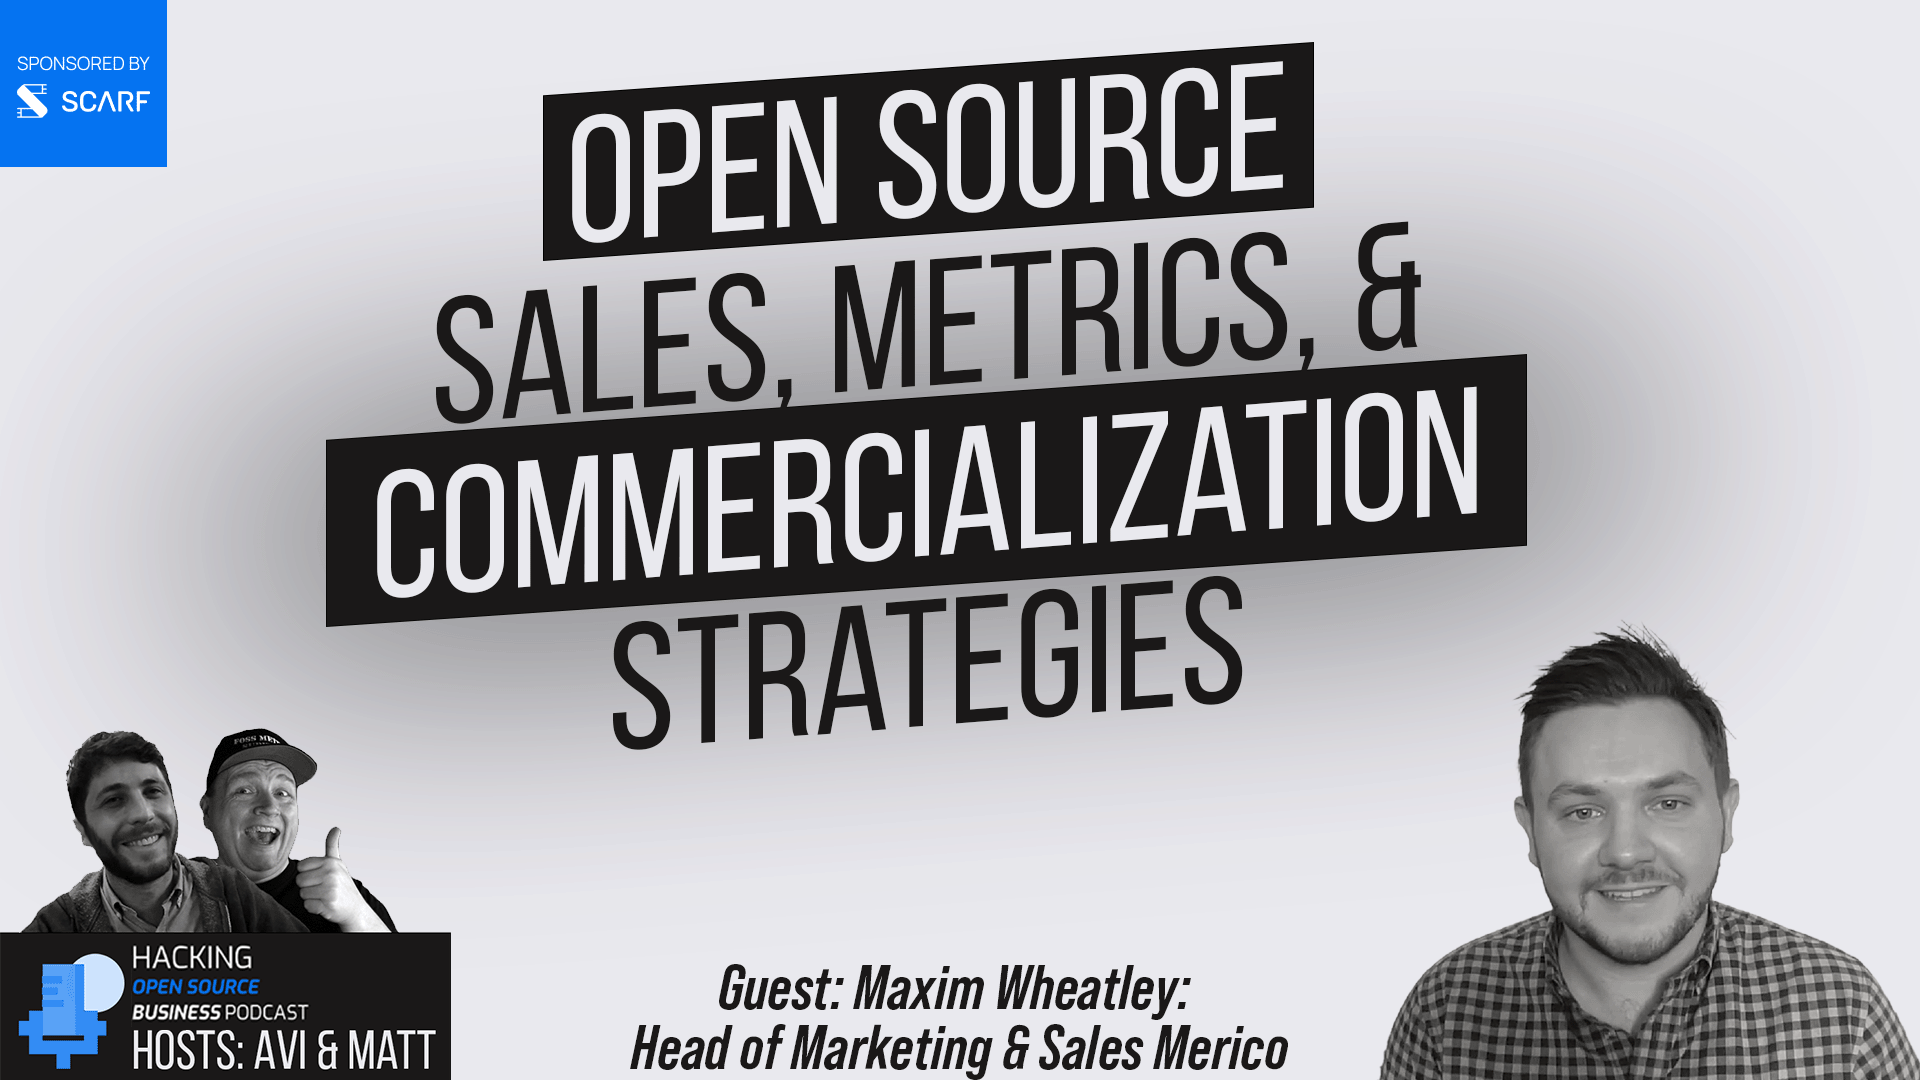 Open Source: Sales, Metrics, & Commercialization Strategies - Hacking Open Source Business Podcast